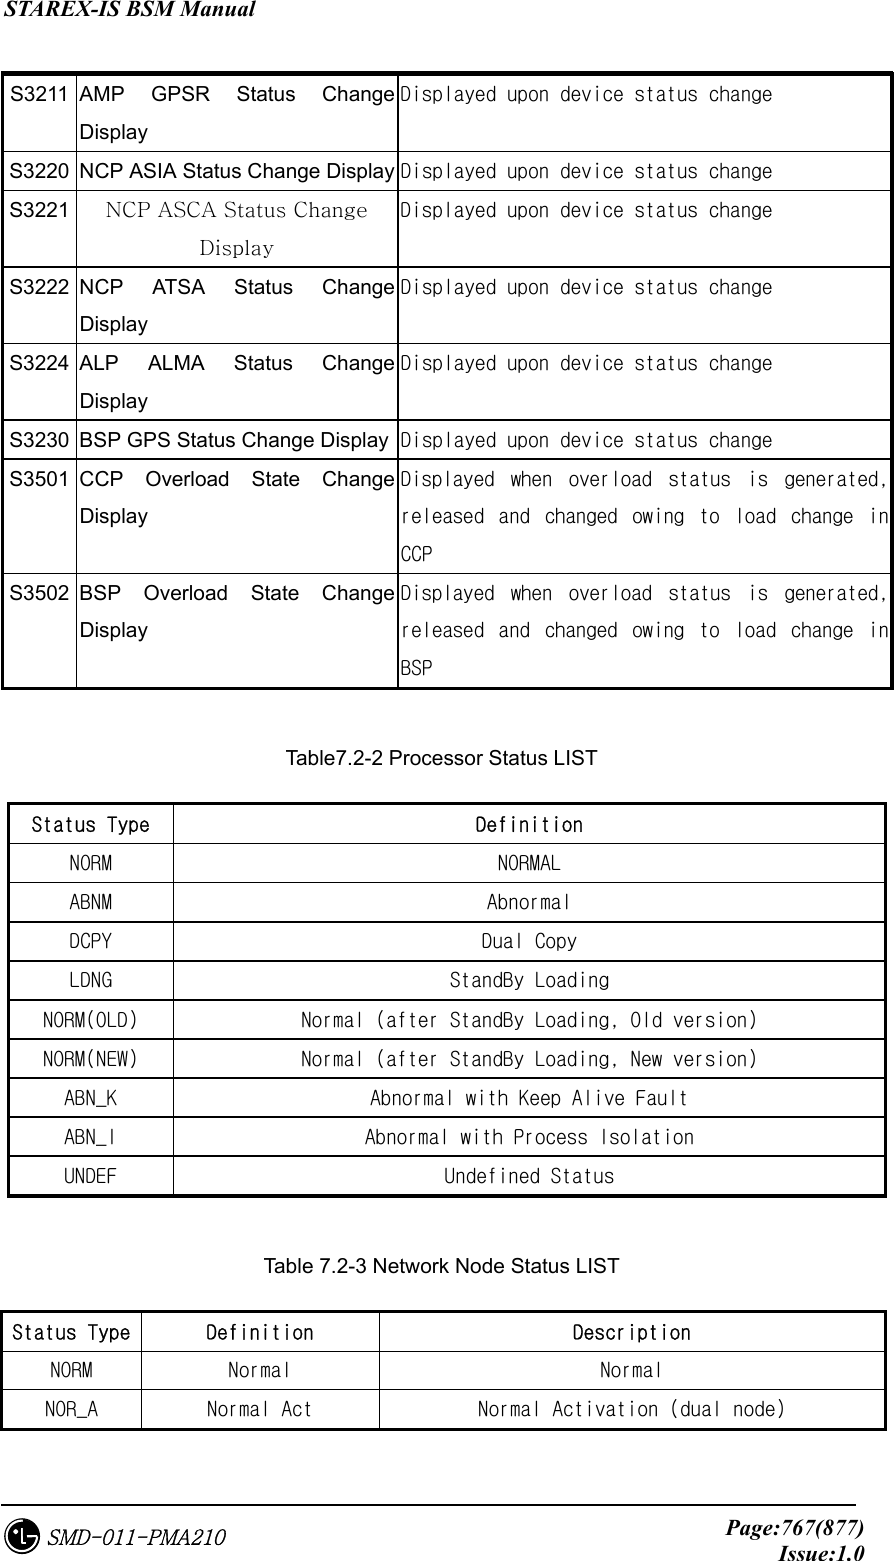 STAREX-IS BSM Manual     Page:767(877)Issue:1.0SMD-011-PMA210 S3211 AMP GPSR Status Change Display Displayed upon device status change S3220  NCP ASIA Status Change Display Displayed upon device status change S3221  NCP ASCA Status Change Display Displayed upon device status change S3222 NCP ATSA Status Change Display Displayed upon device status change S3224 ALP ALMA Status Change Display Displayed upon device status change S3230  BSP GPS Status Change Display  Displayed upon device status change S3501 CCP Overload State Change Display Displayed  when  overload  status  is  generated, released  and  changed  owing  to  load  change  in CCP S3502 BSP Overload State Change Display Displayed  when  overload  status  is  generated, released  and  changed  owing  to  load  change  in BSP  Table7.2-2 Processor Status LIST Status Type  Definition  NORM  NORMAL ABNM  Abnormal DCPY  Dual Copy LDNG  StandBy Loading NORM(OLD)  Normal (after StandBy Loading, Old version) NORM(NEW)  Normal (after StandBy Loading, New version) ABN_K  Abnormal with Keep Alive Fault ABN_I  Abnormal with Process Isolation UNDEF  Undefined Status  Table 7.2-3 Network Node Status LIST Status Type  Definition   Description  NORM  Normal  Normal  NOR_A  Normal Act  Normal Activation (dual node) 